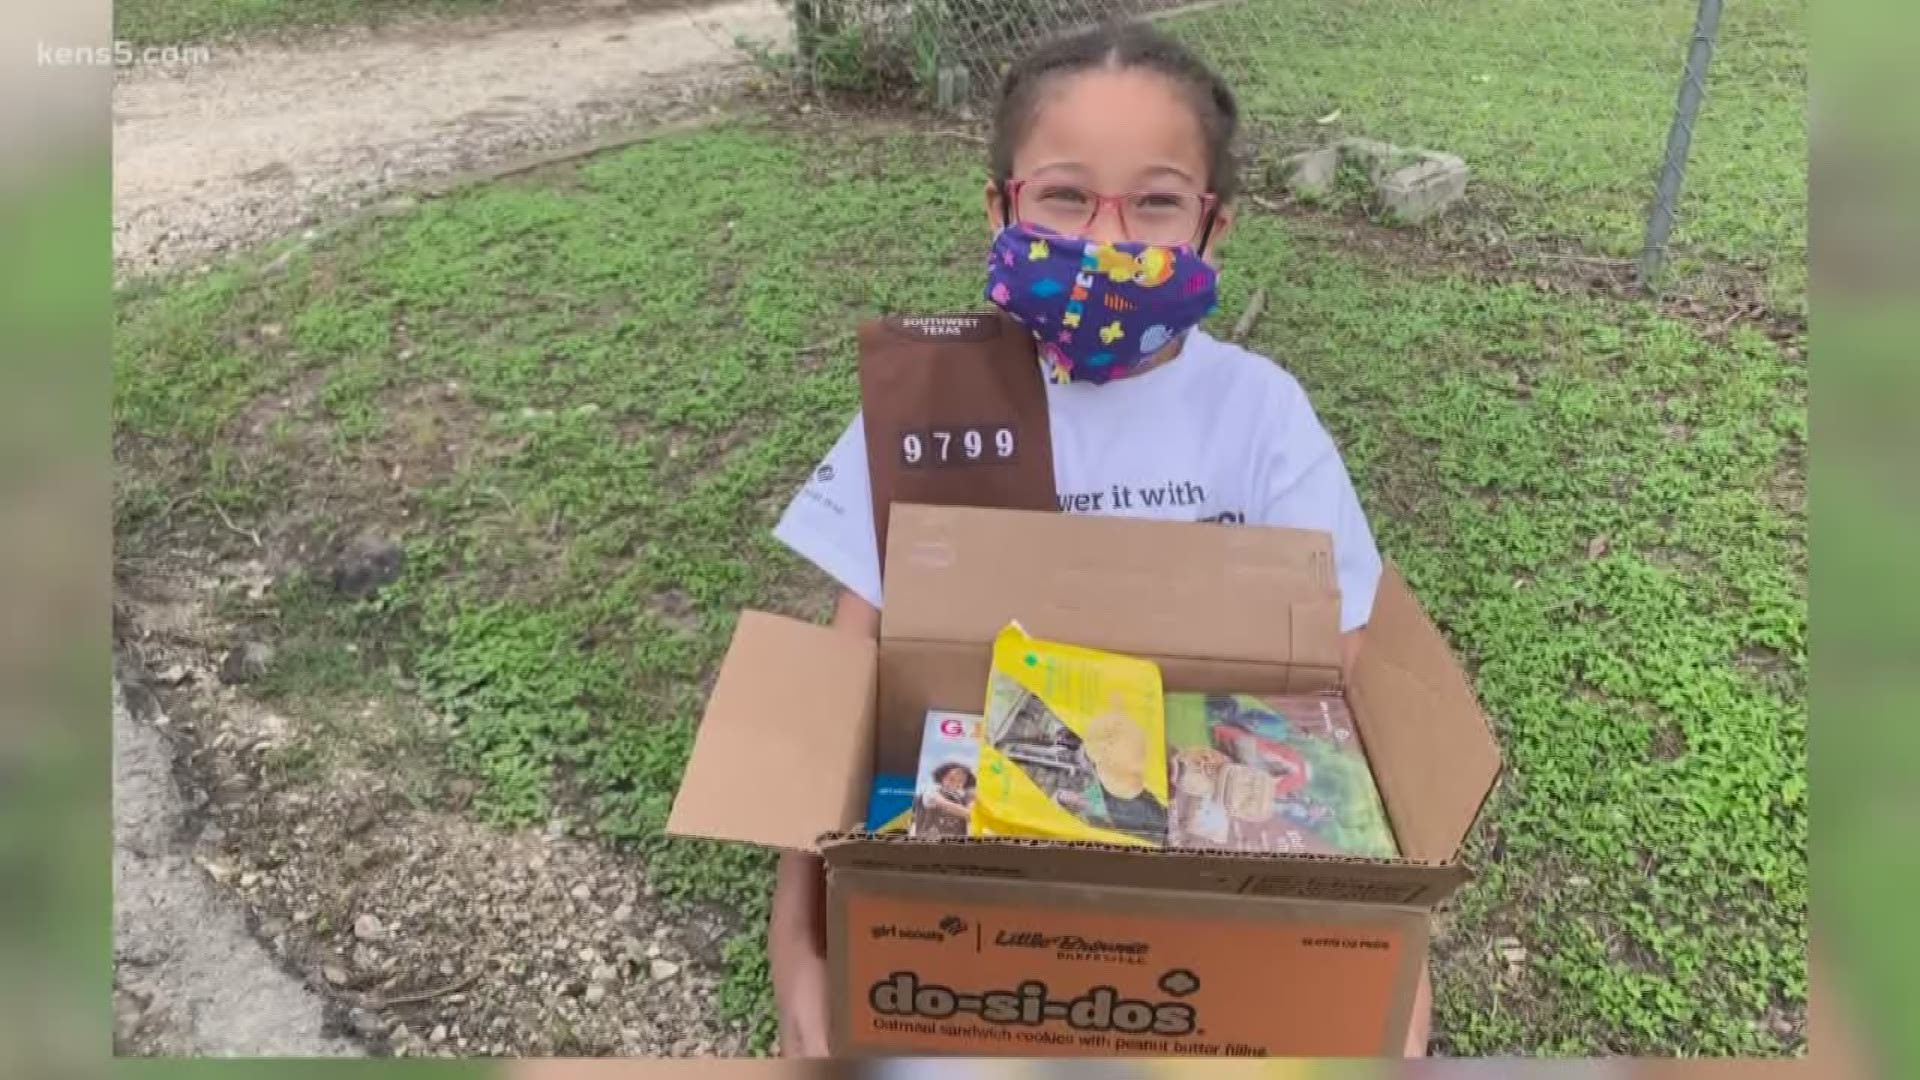 A Girl Scout in New Braunfels used money she raised from cookie sales to help a single mom in her community who lost her service industry job.